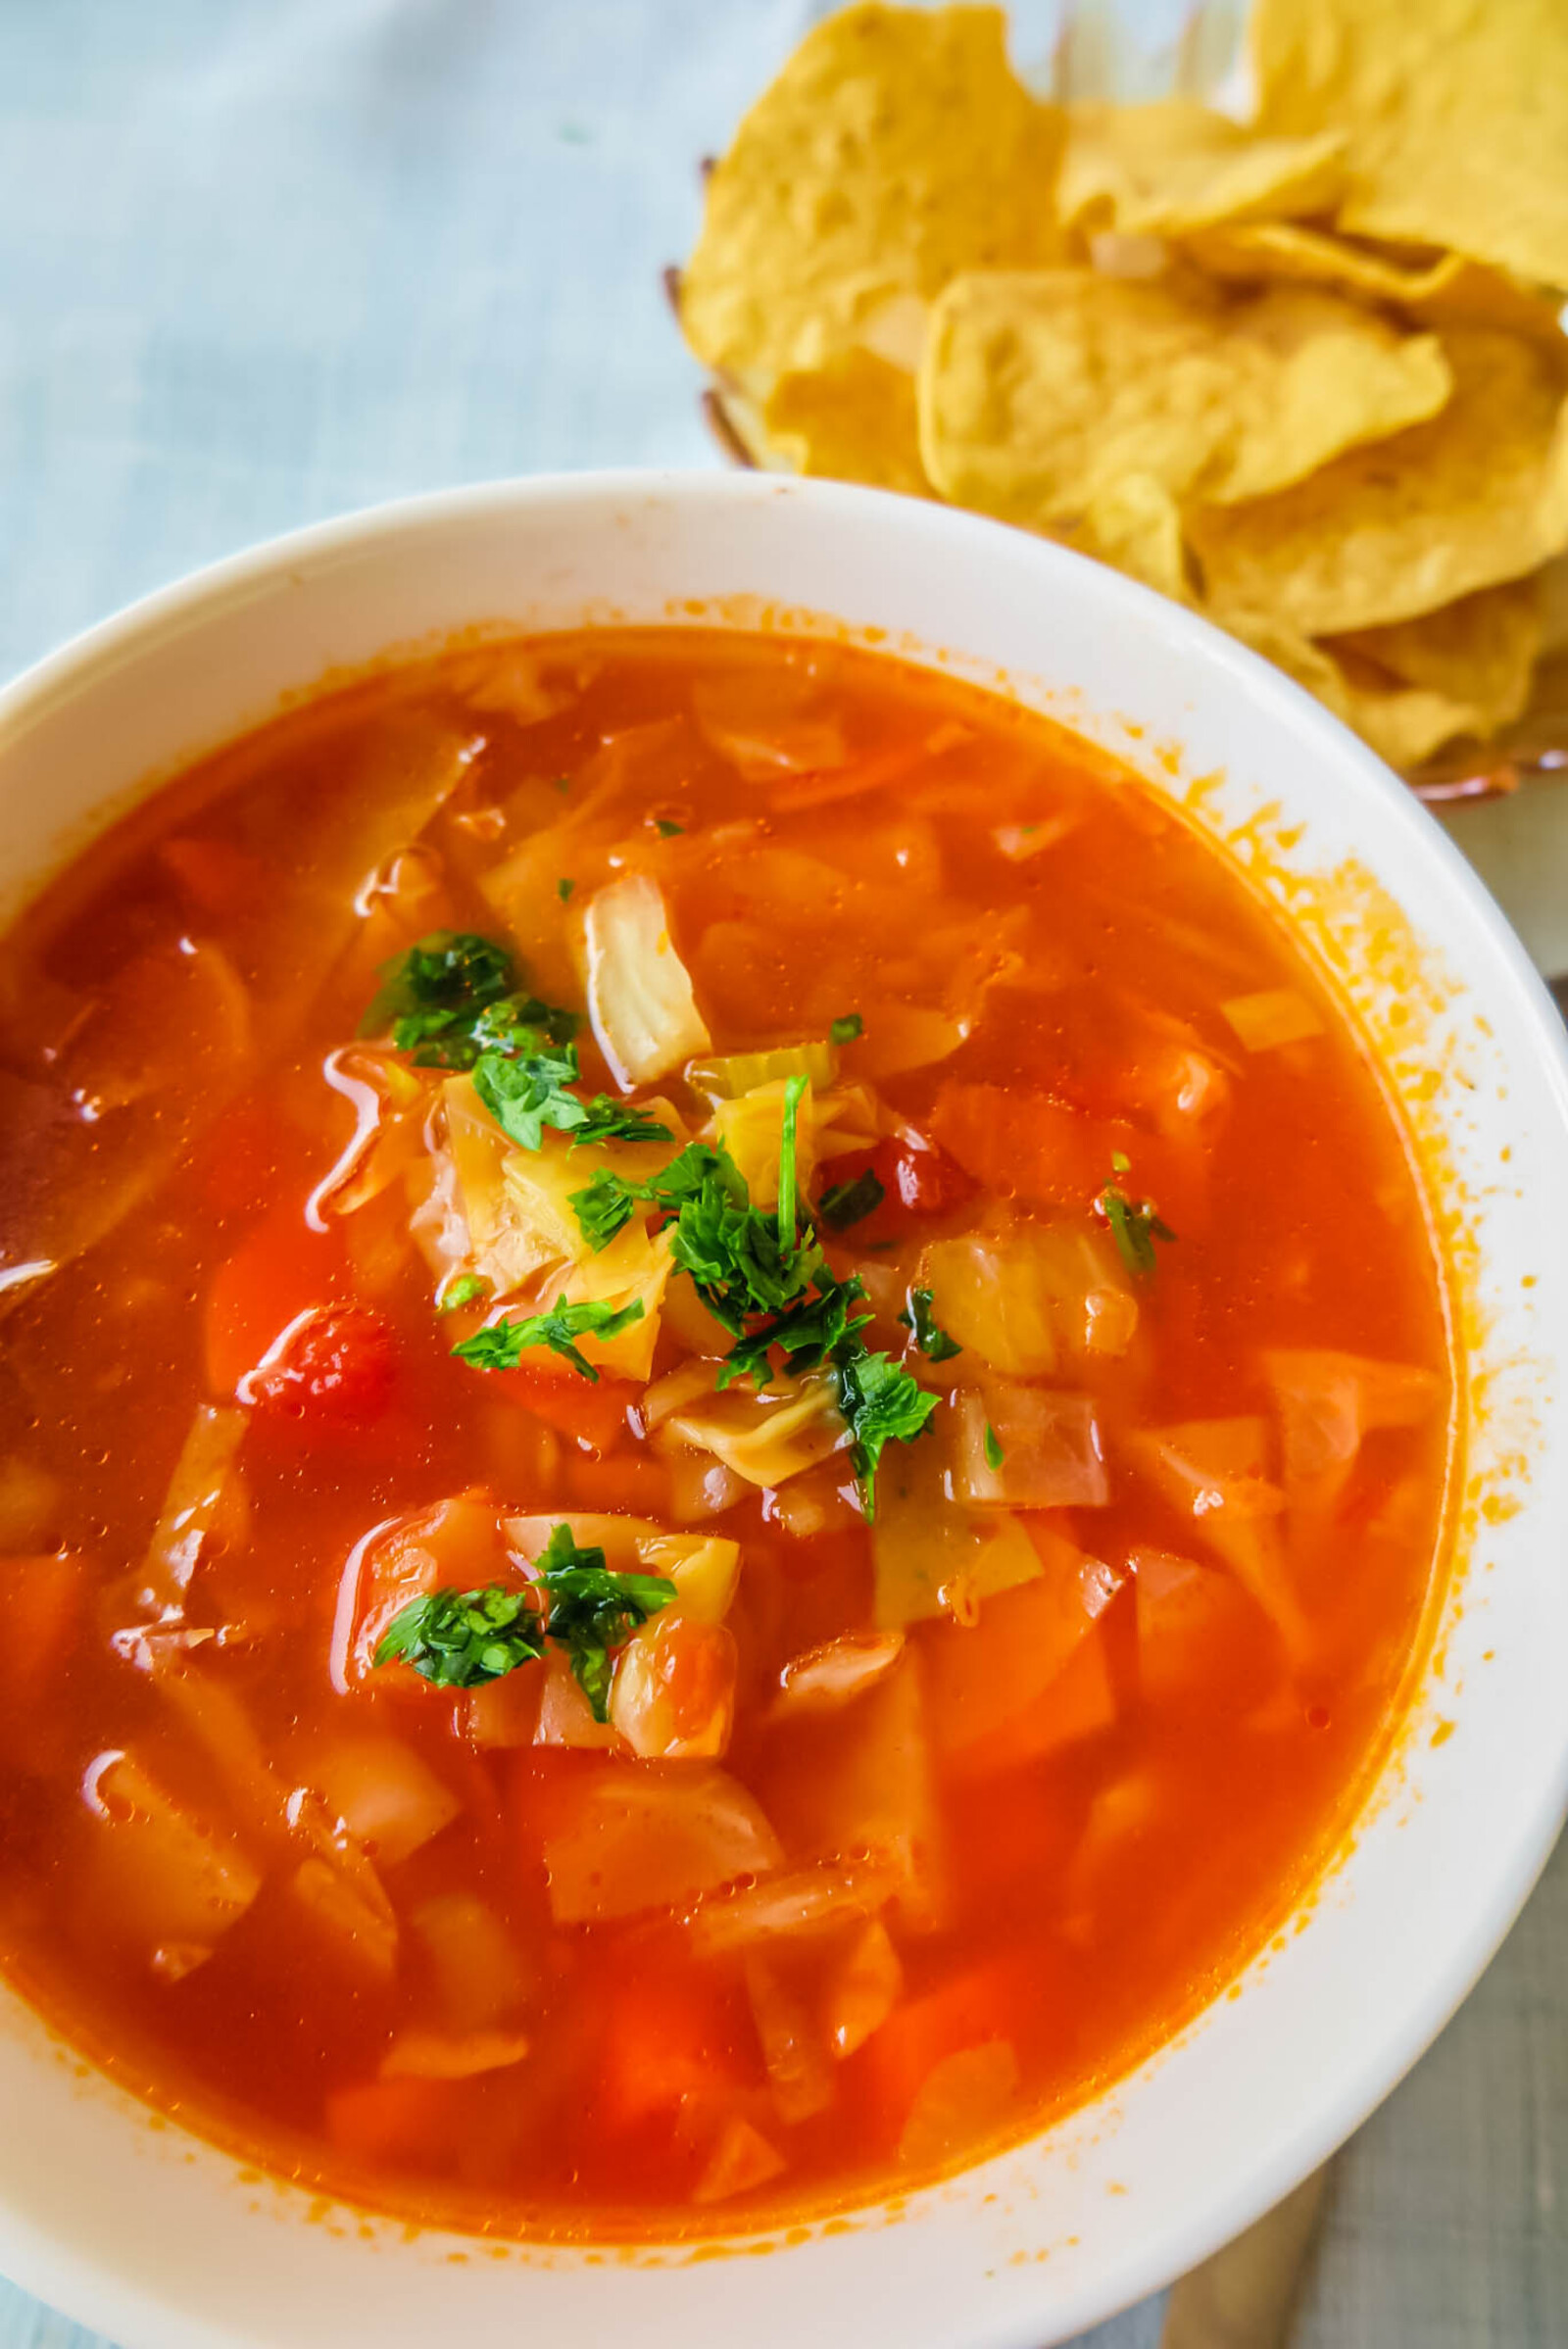 Healing Cabbage Soup